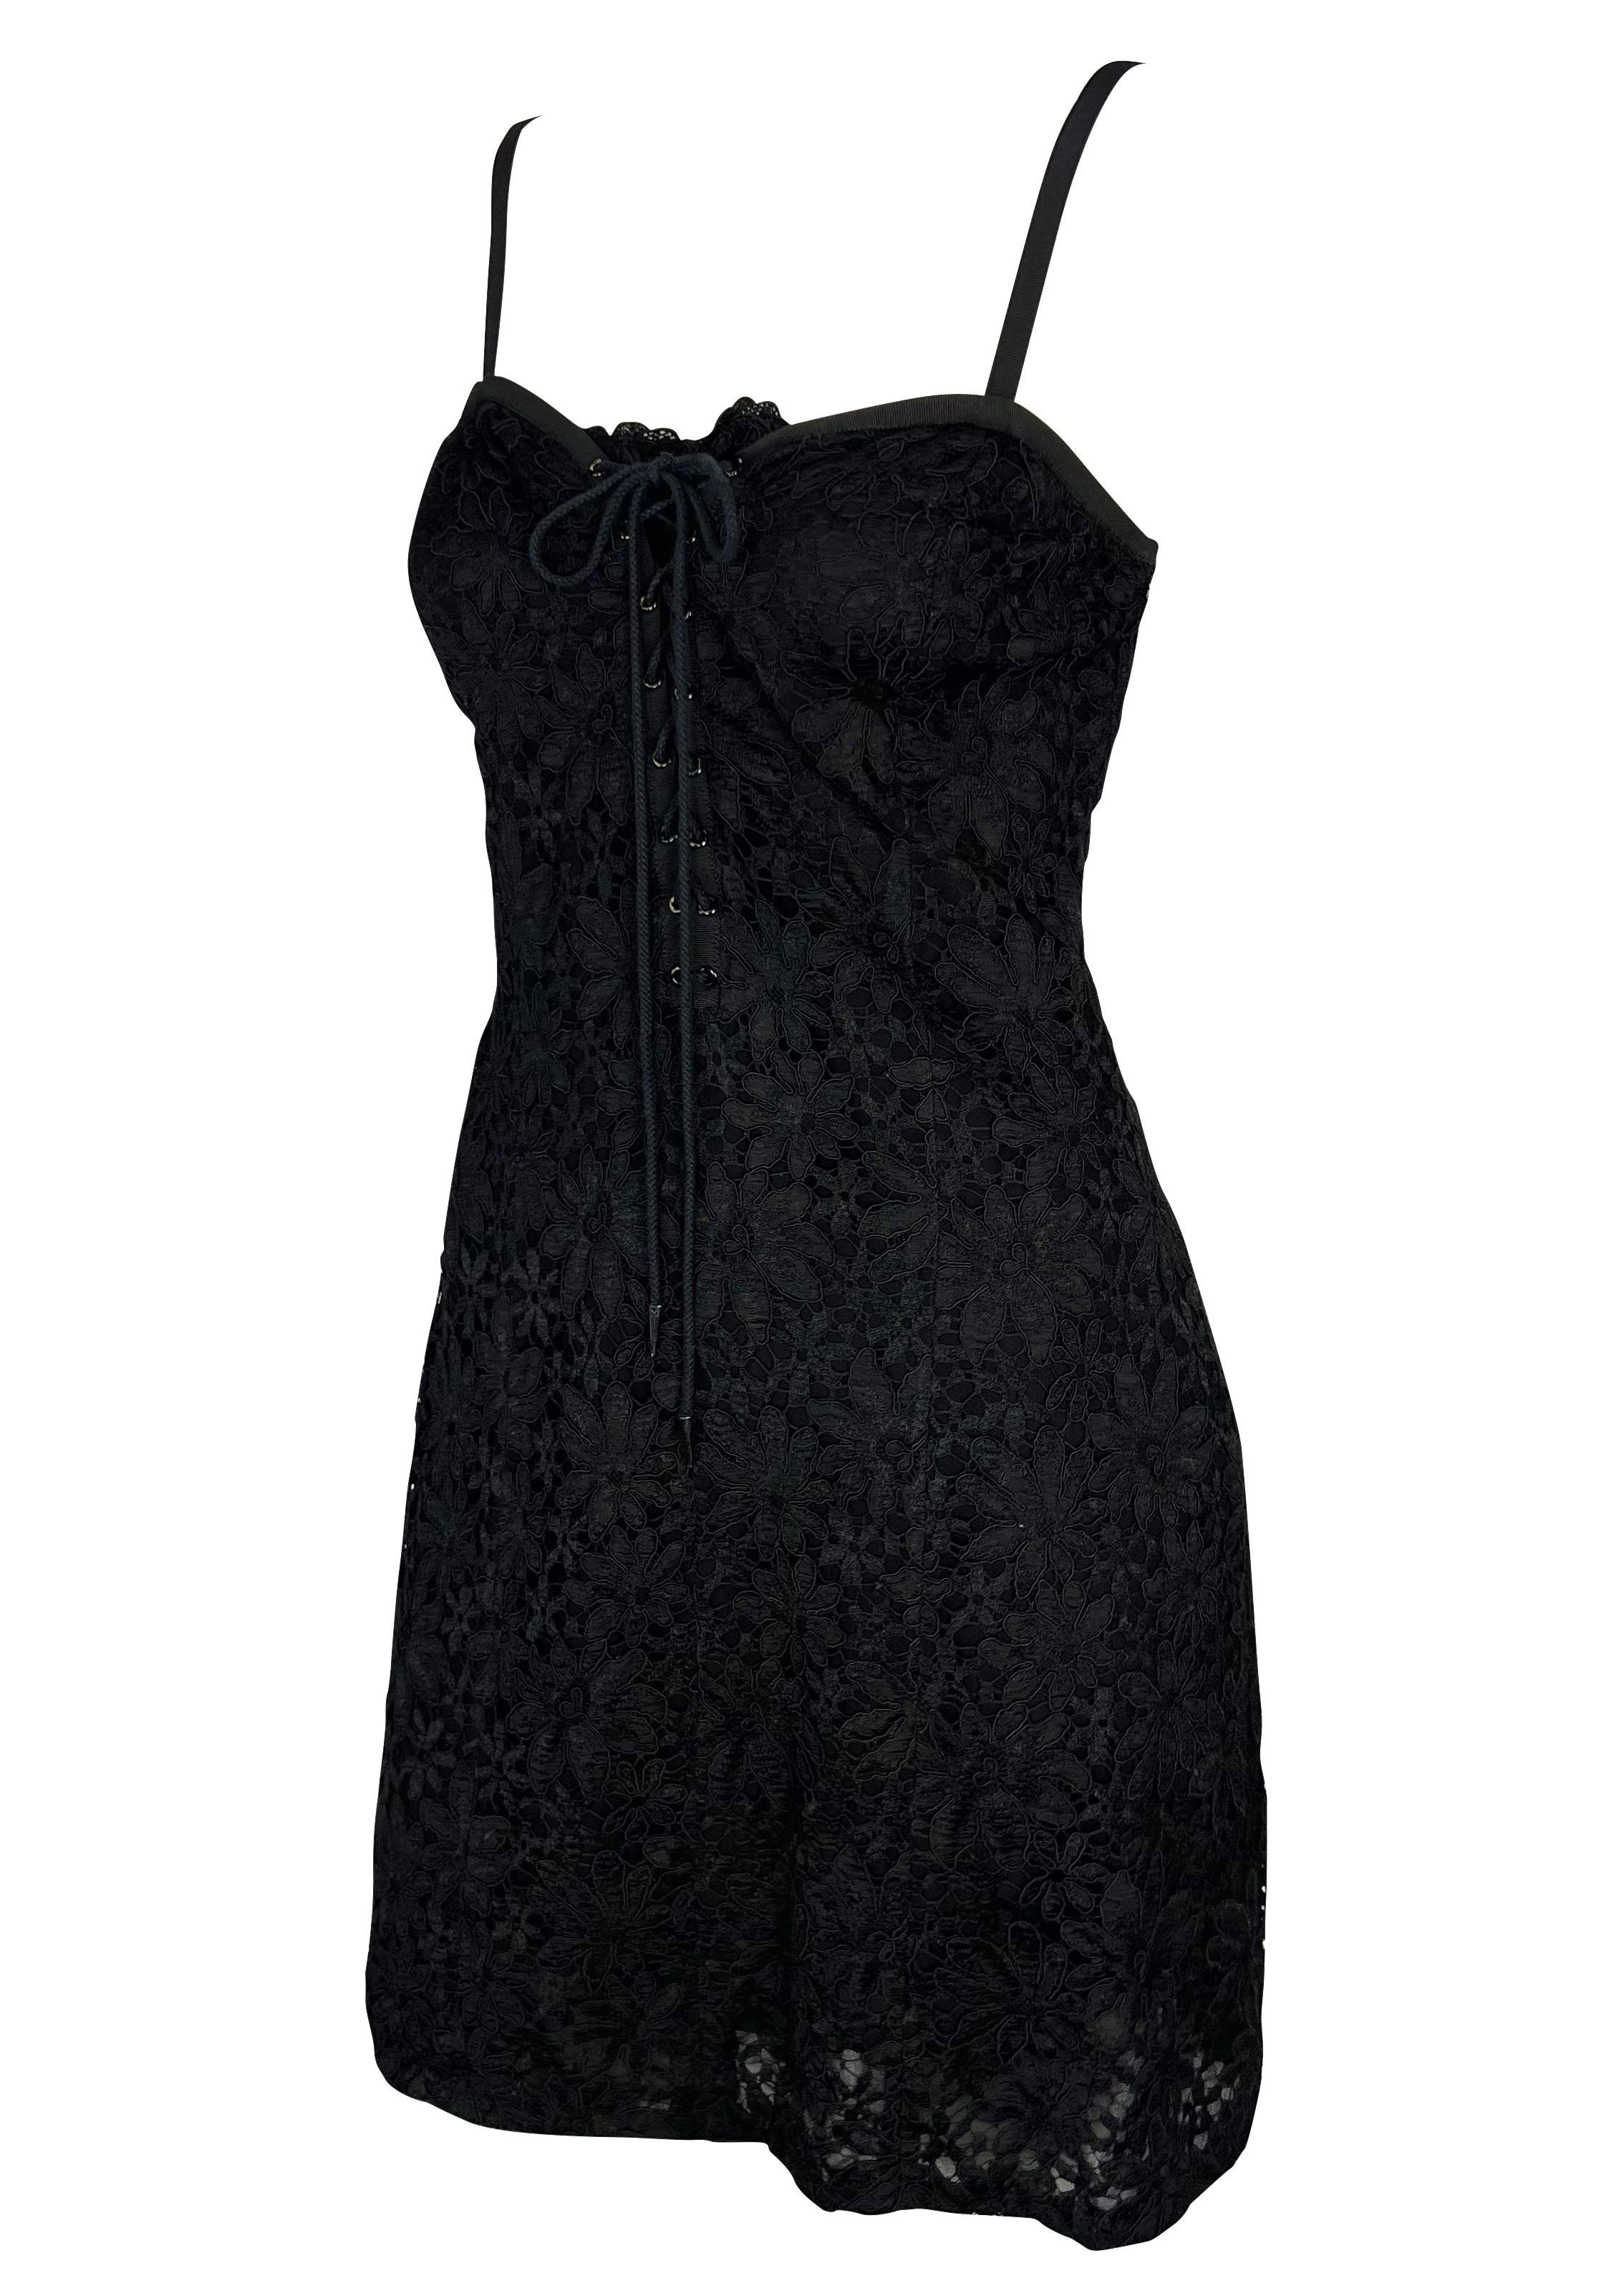 Presenting a black lace Yves Saint Laurent Rive Gauche mini dress. From the early 1990s, this beautiful dress is covered in lace and features a sweetheart-style neckline with spaghetti straps and a plunging lace-up detail at the front. Effortlessly